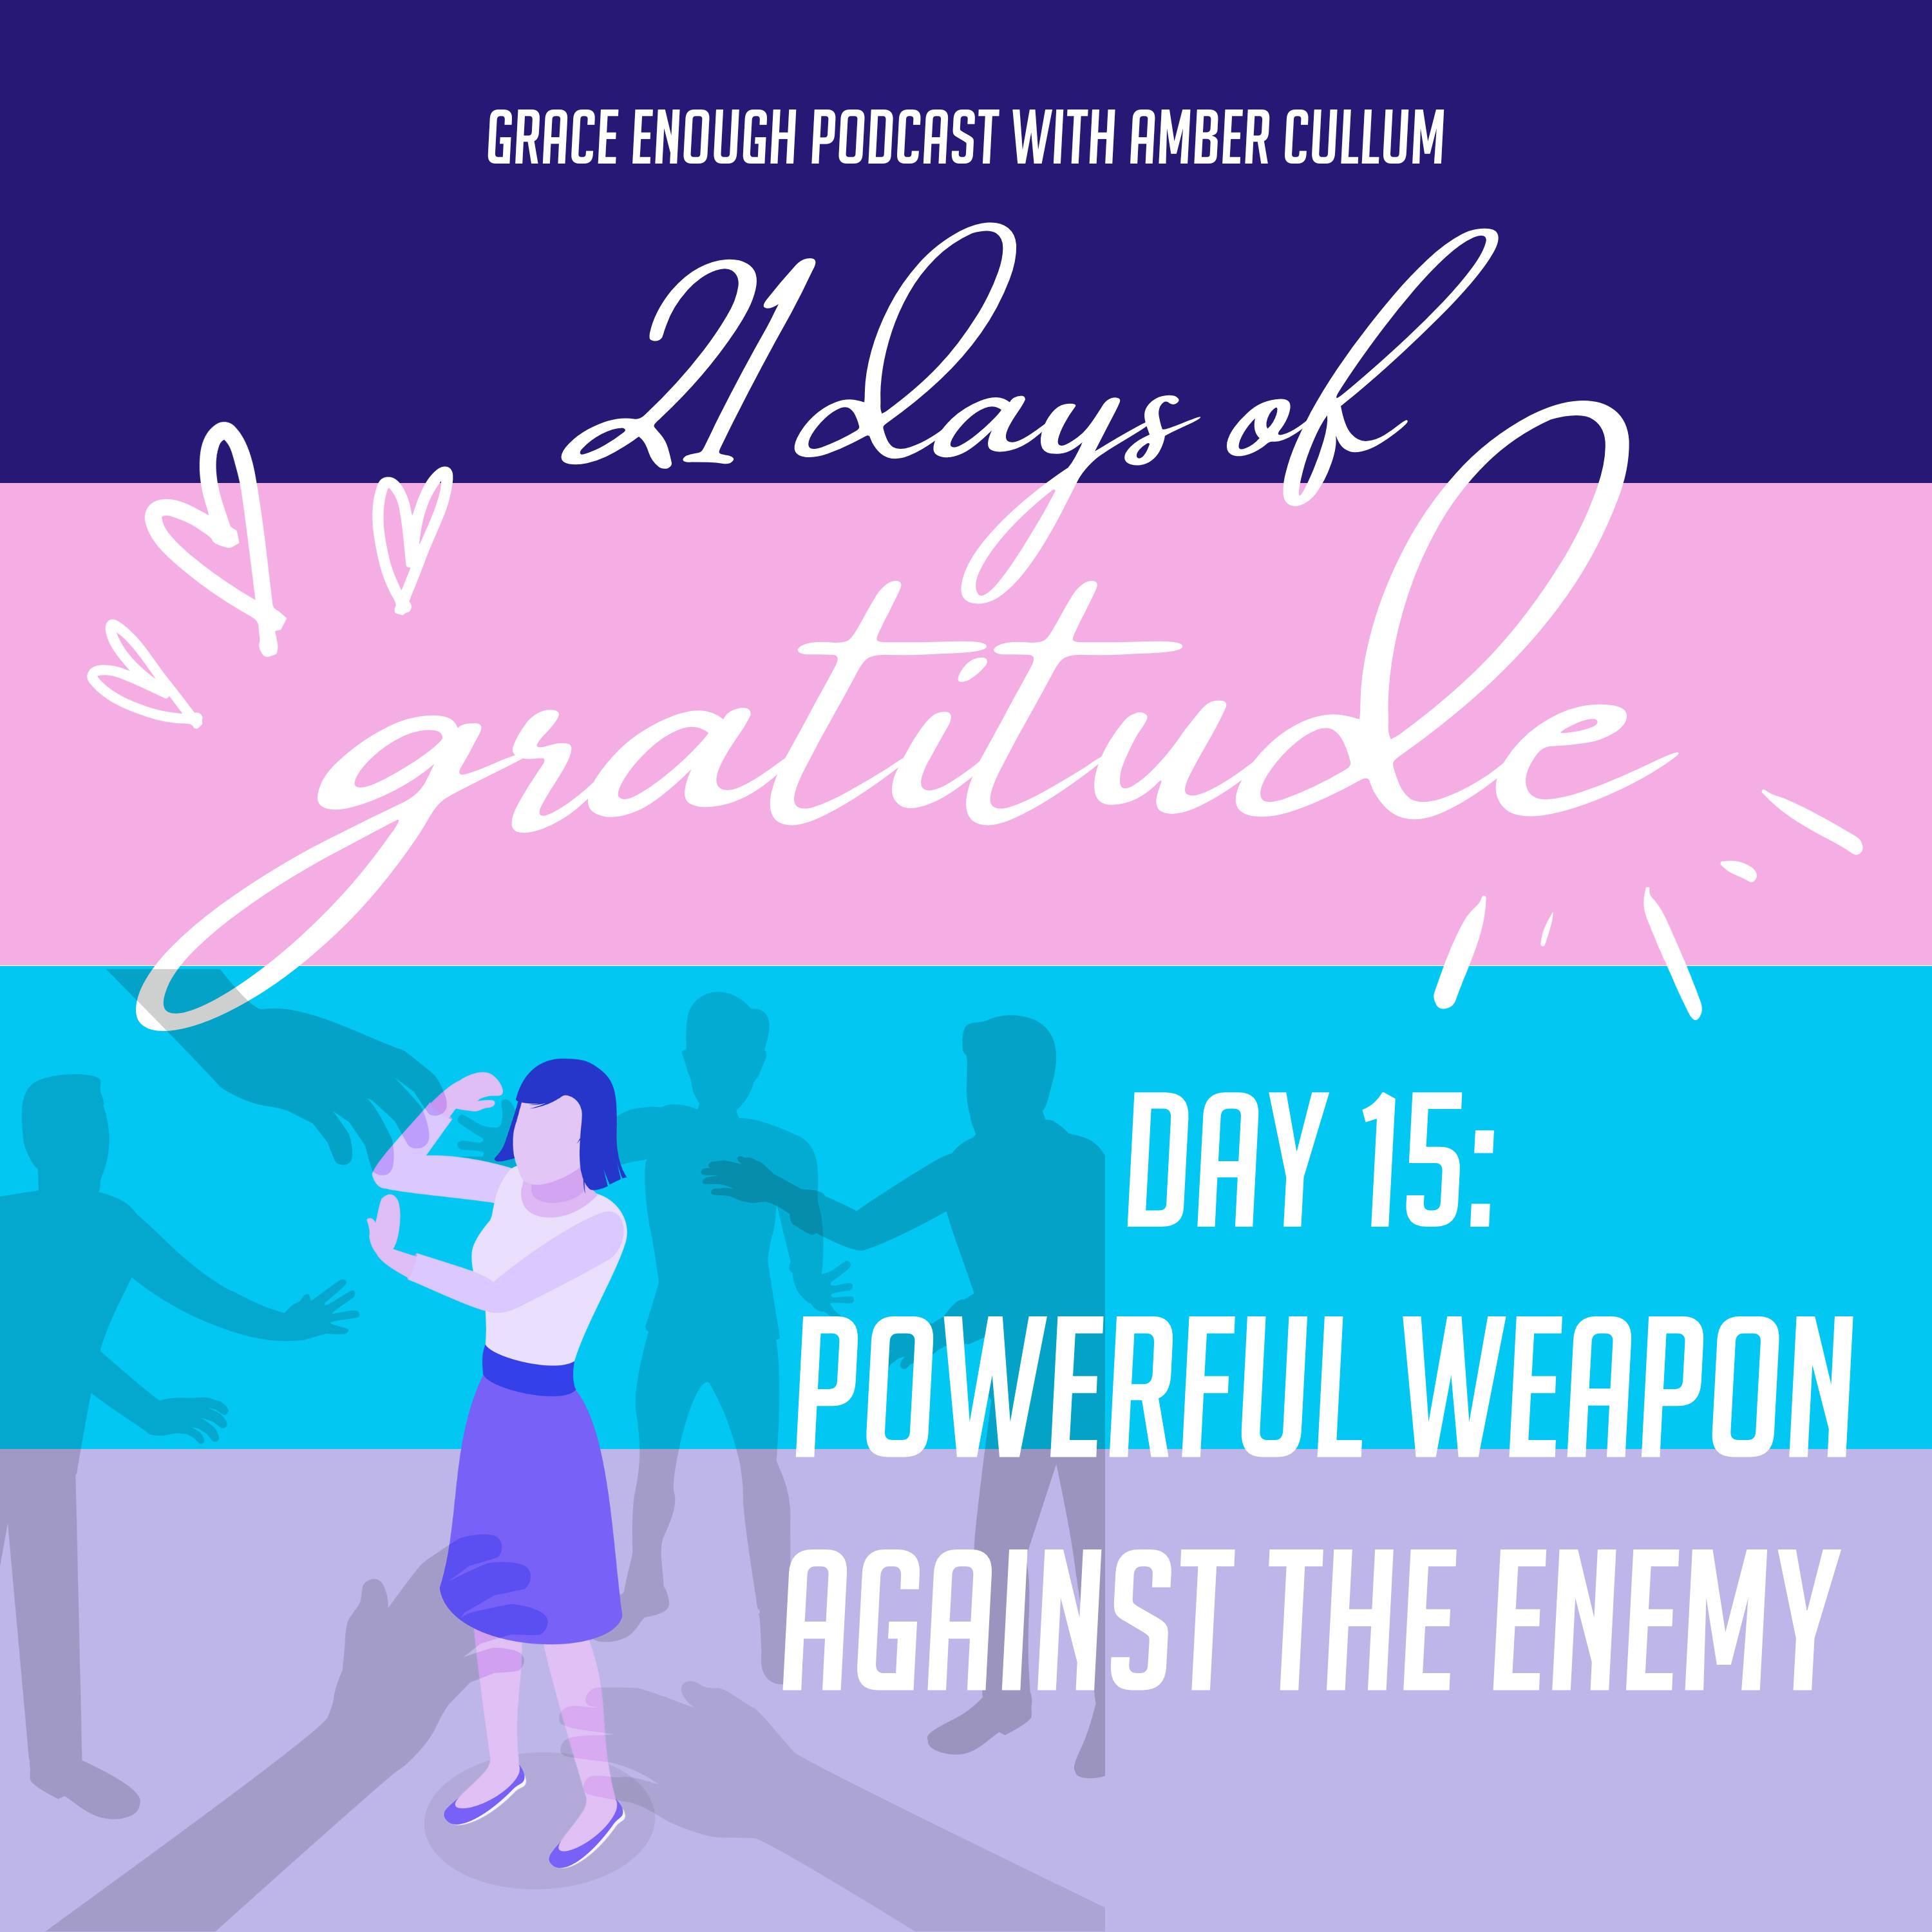 15/21 Days of Gratitude: Powerful Weapon Against the Enemy